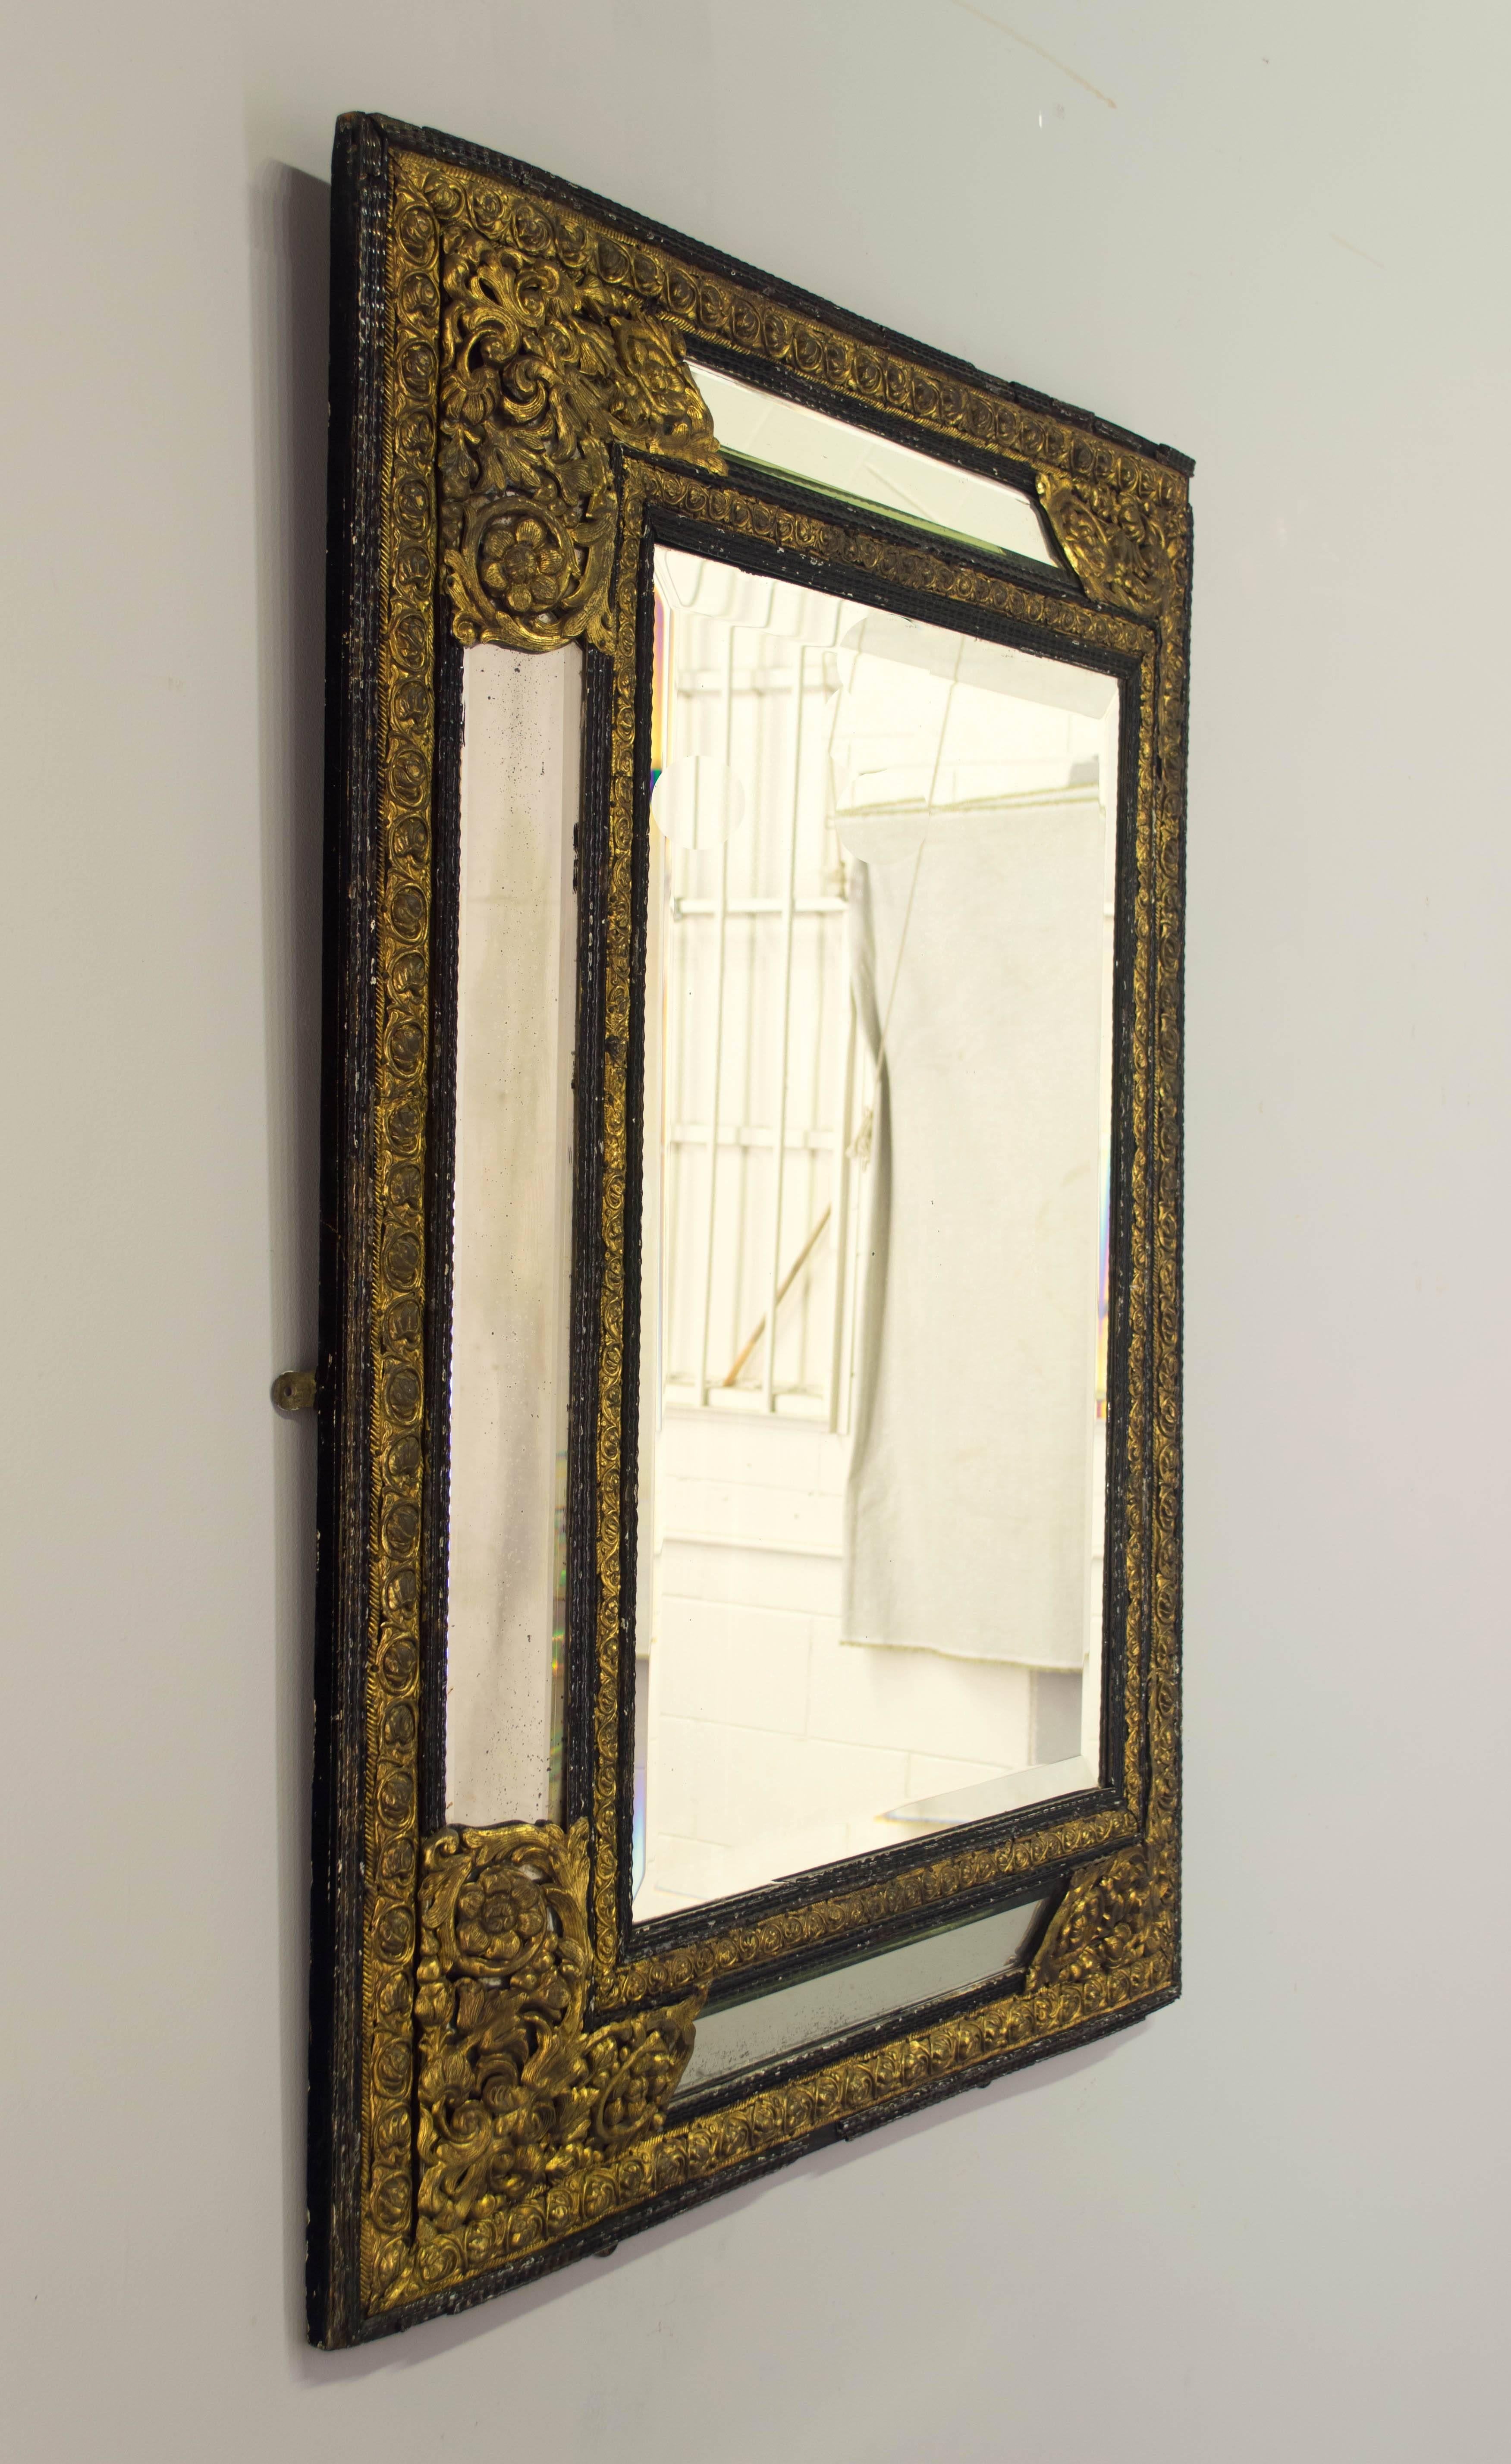 19th c. Dutch mirror with elaborately detailed brass embossed and ebony trim. Original beveled mirror. Missing some pieces of trim. We have a large selection of French antiques. Please visit our web site.